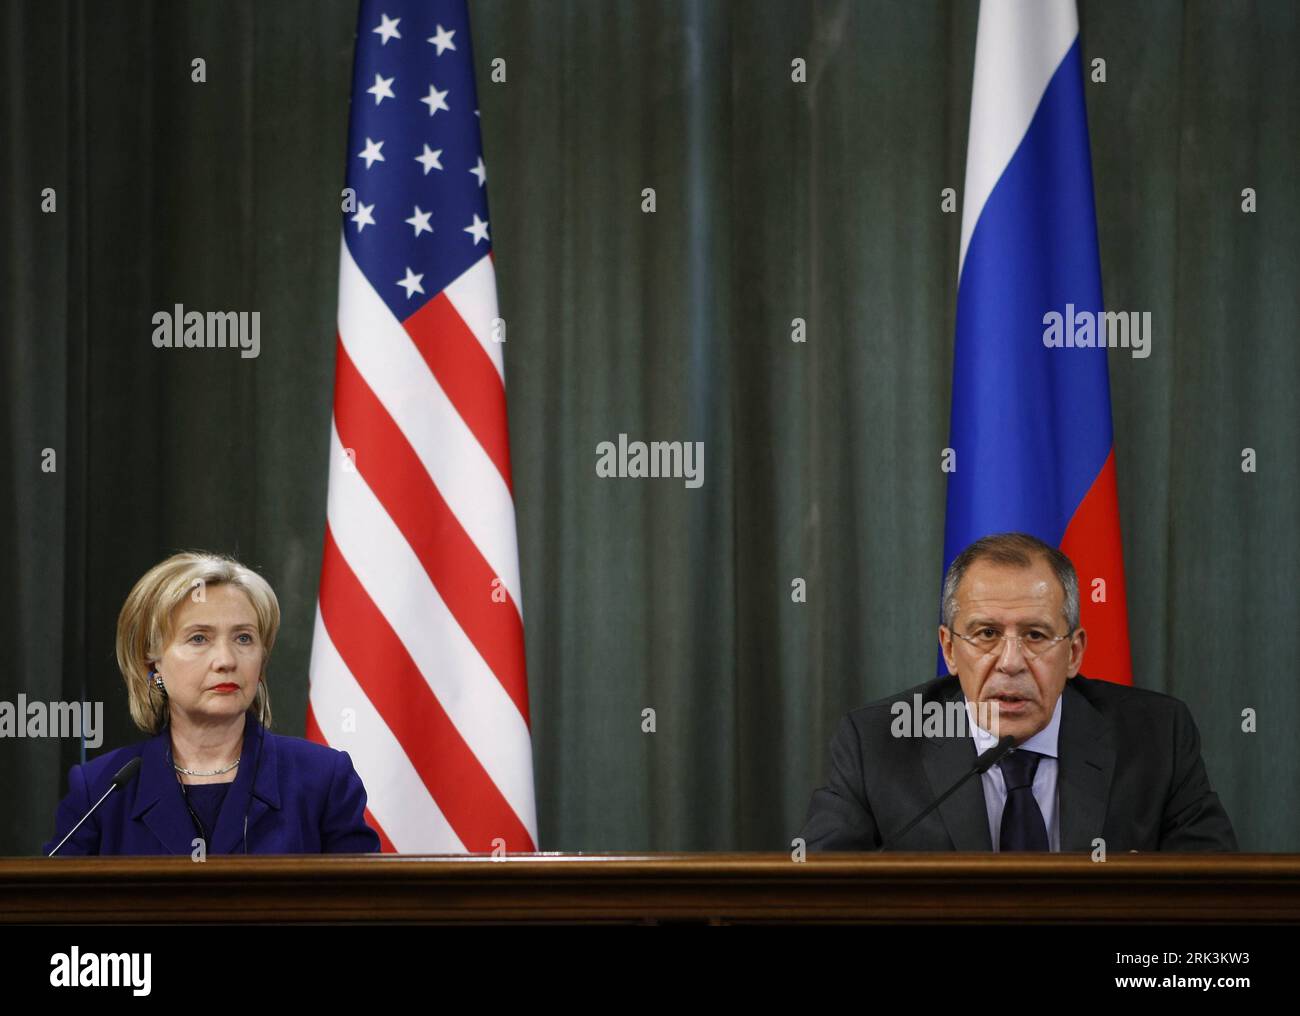 Bildnummer: 53527860  Datum: 13.10.2009  Copyright: imago/Xinhua (091013) -- MOSCOW, Oct. 13, (Xinhua) -- U.S. Secretary of State Hillary Clinton (L) and Russian Foreign Minister Sergei Lavrov attend a news conference after their meeting in Moscow, capital of Russia, on Oct, 13, 2009. Russian Foreign Minister Sergei Lavrov said on Tuesday that Russia and the United States have made considerable progress on a new nuclear arms reduction treaty. (Xinhua/Lu Jinbo) (jl) (9)RUSSIA-U.S.-POLITICS PUBLICATIONxNOTxINxCHN People Politik kbdig xsk 2009 quer premiumd    Bildnummer 53527860 Date 13 10 2009 Stock Photo